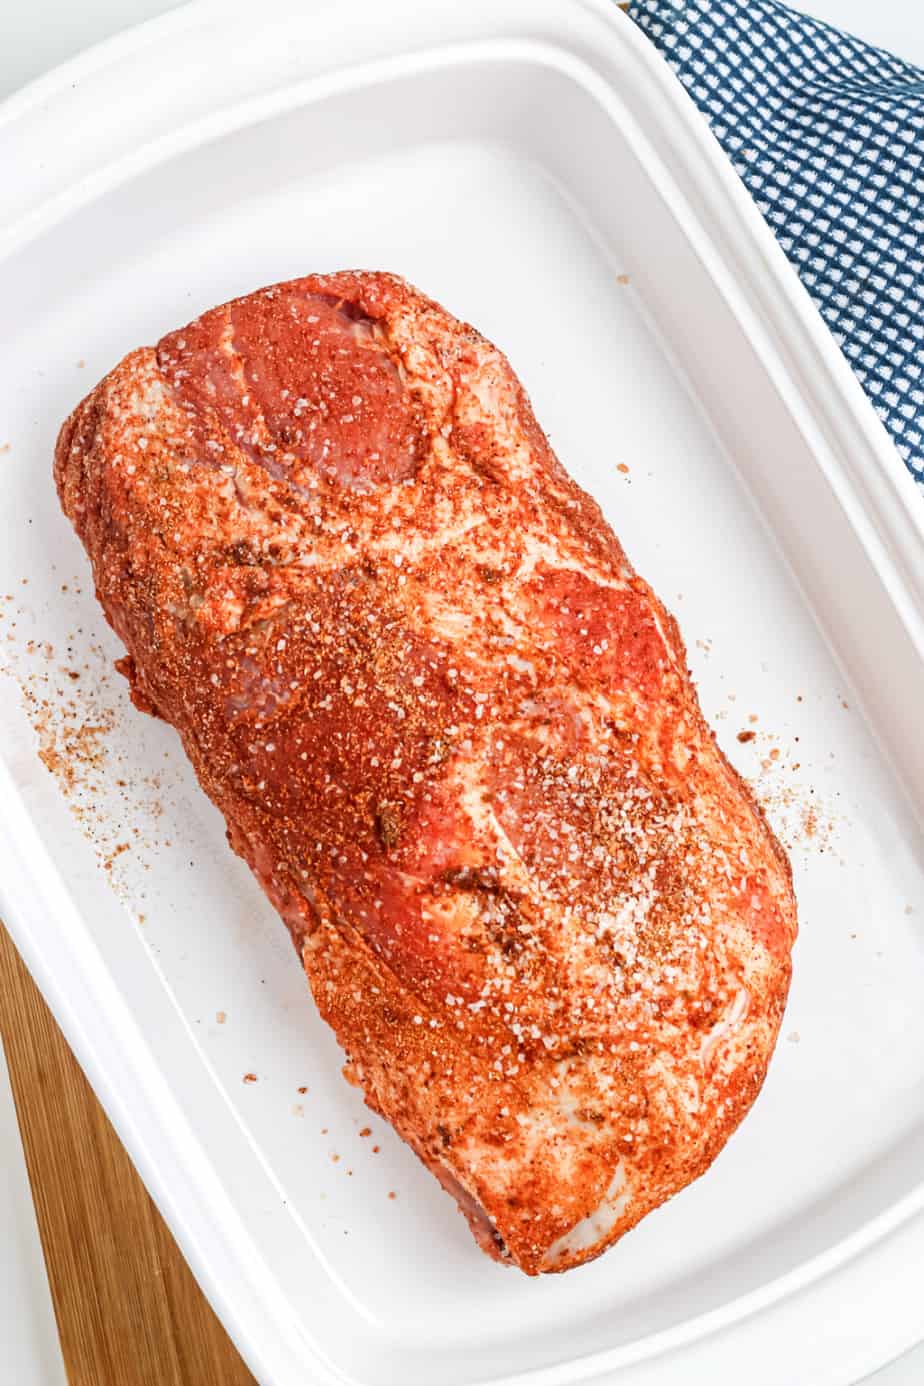 Pork loin covered in spices in a baking pan